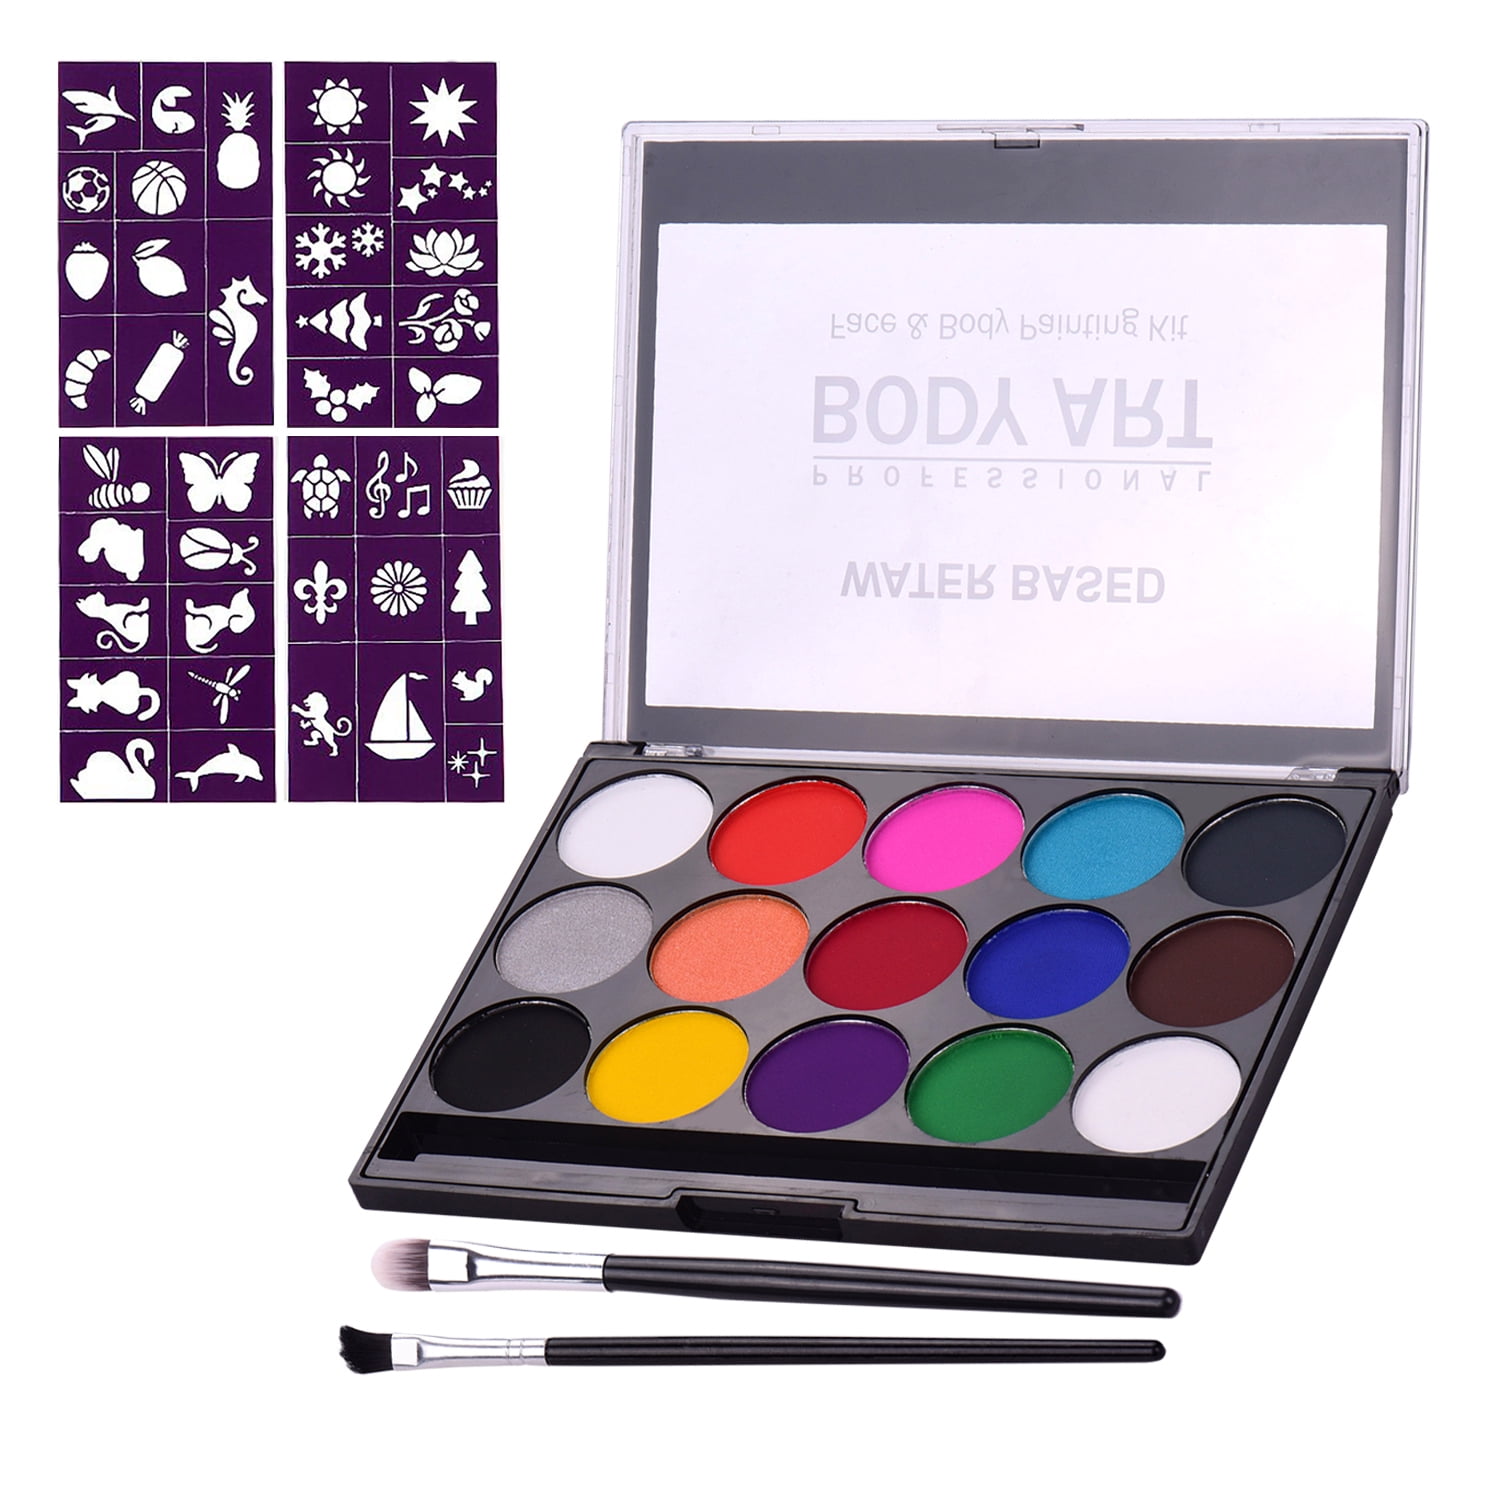 Professional Face Painting Kit